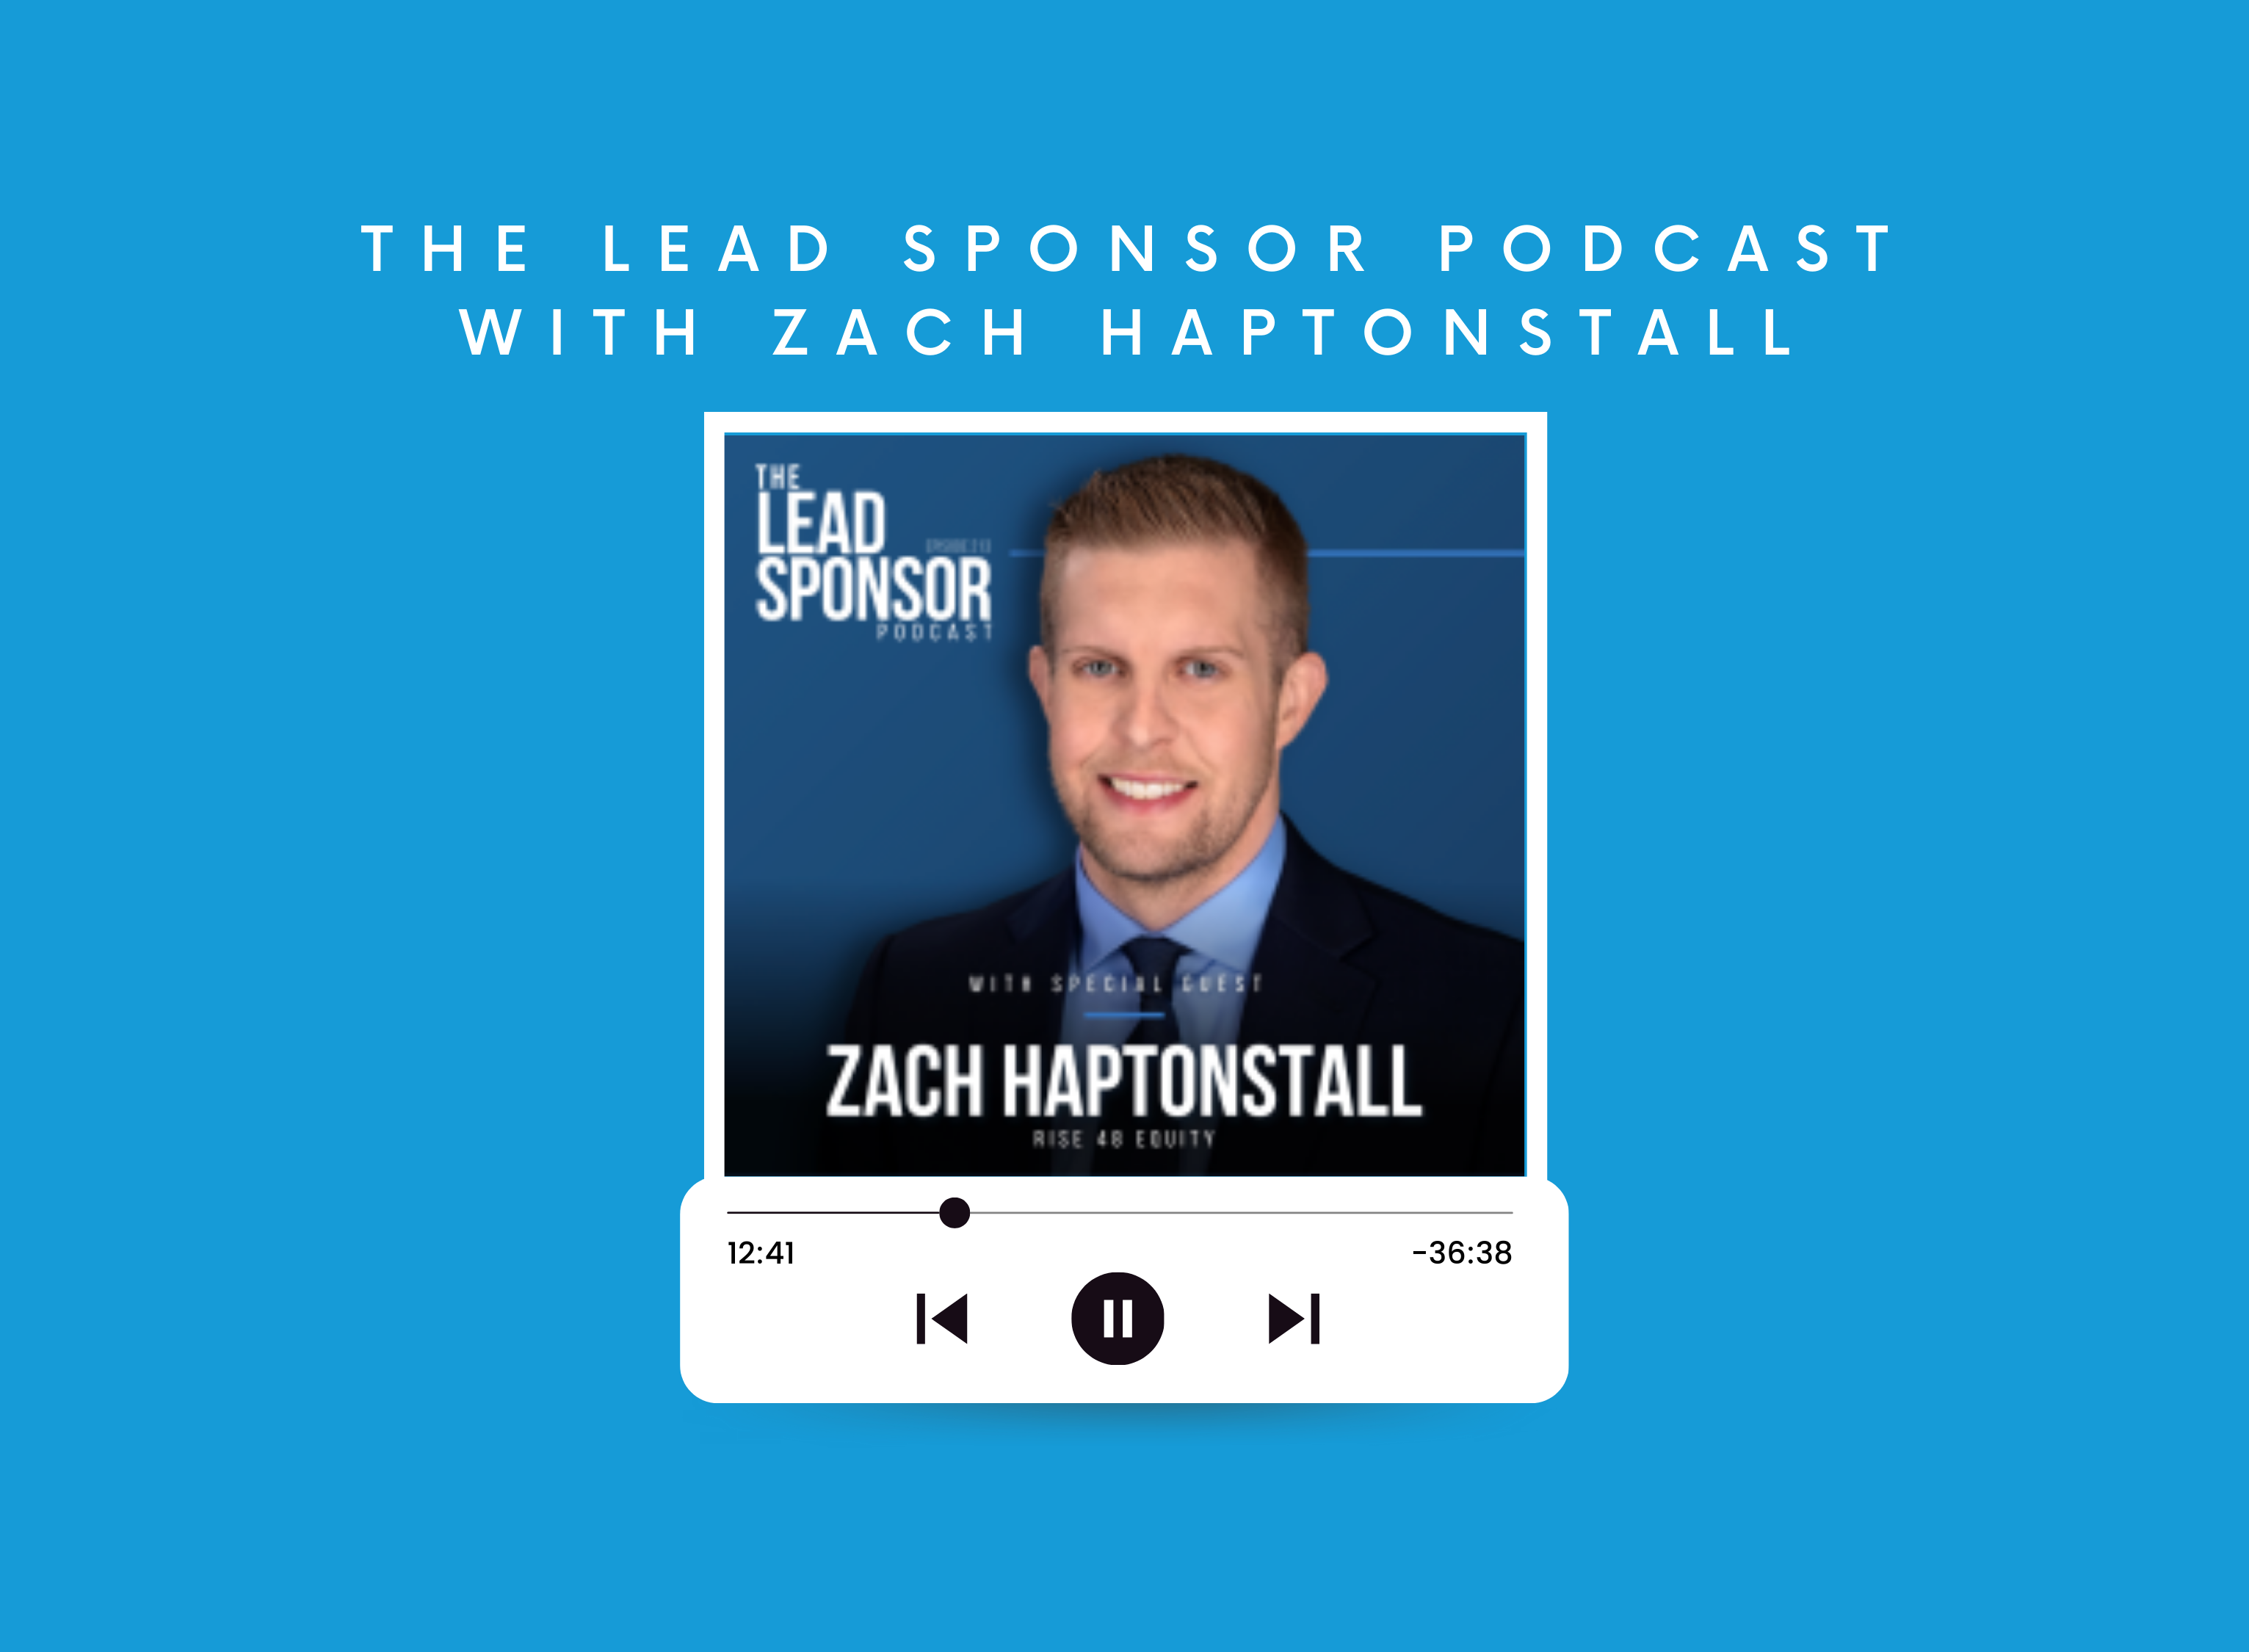 The Lead Sponsor Podcast